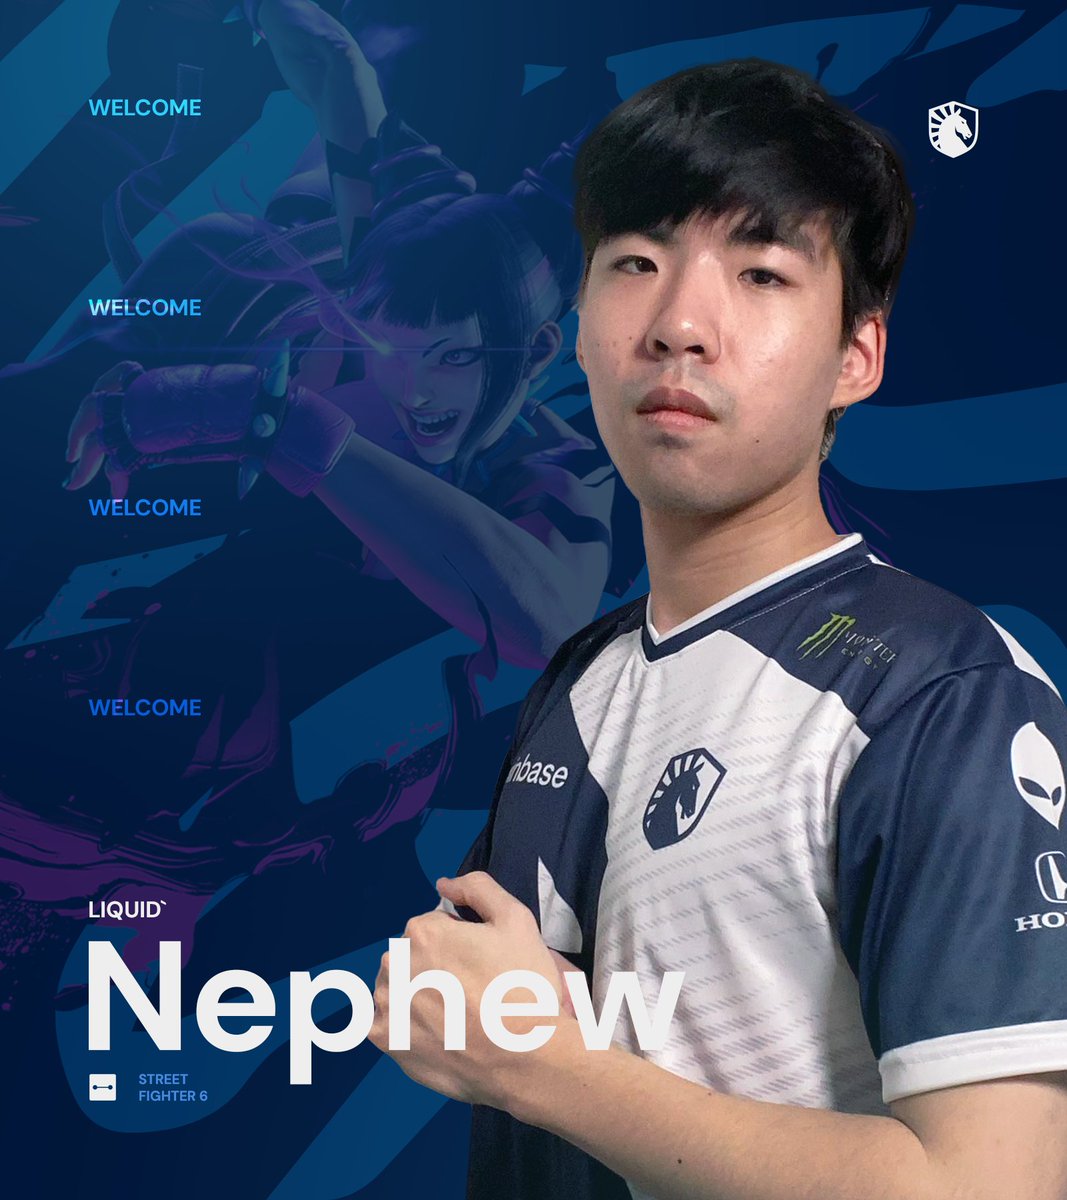 A rising star in Street Fighter 6, Juri prodigy @nephewdork joins the wave🌊 Welcome💙